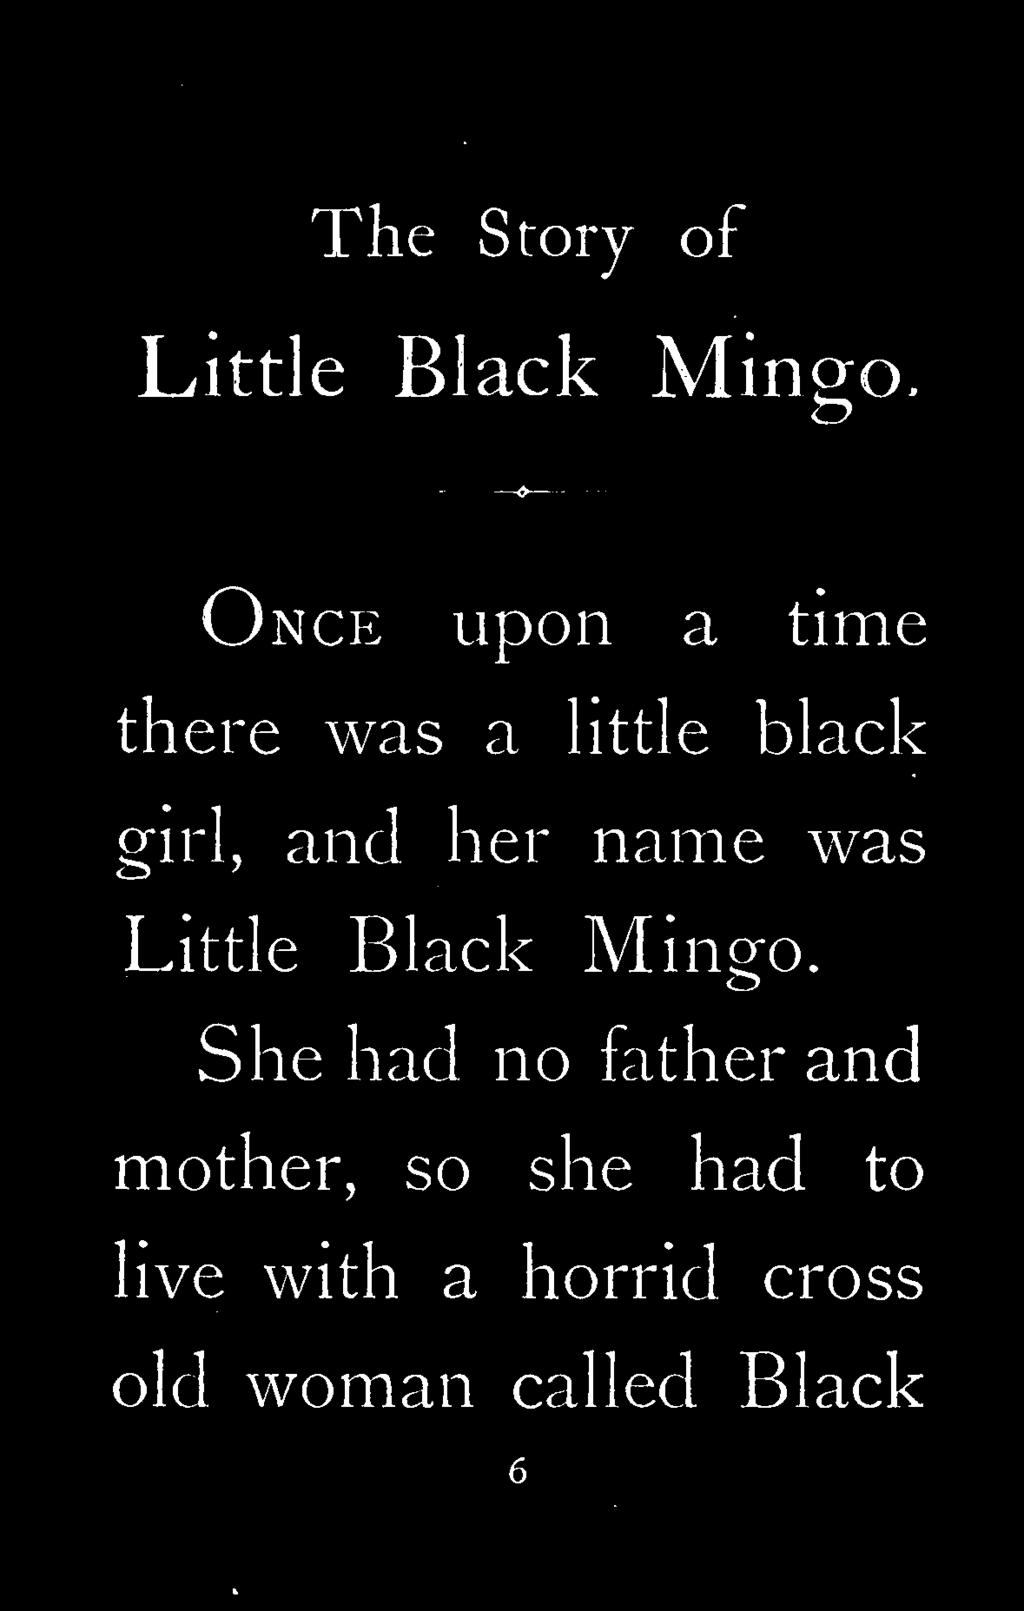 her name was Little Black Mingo.